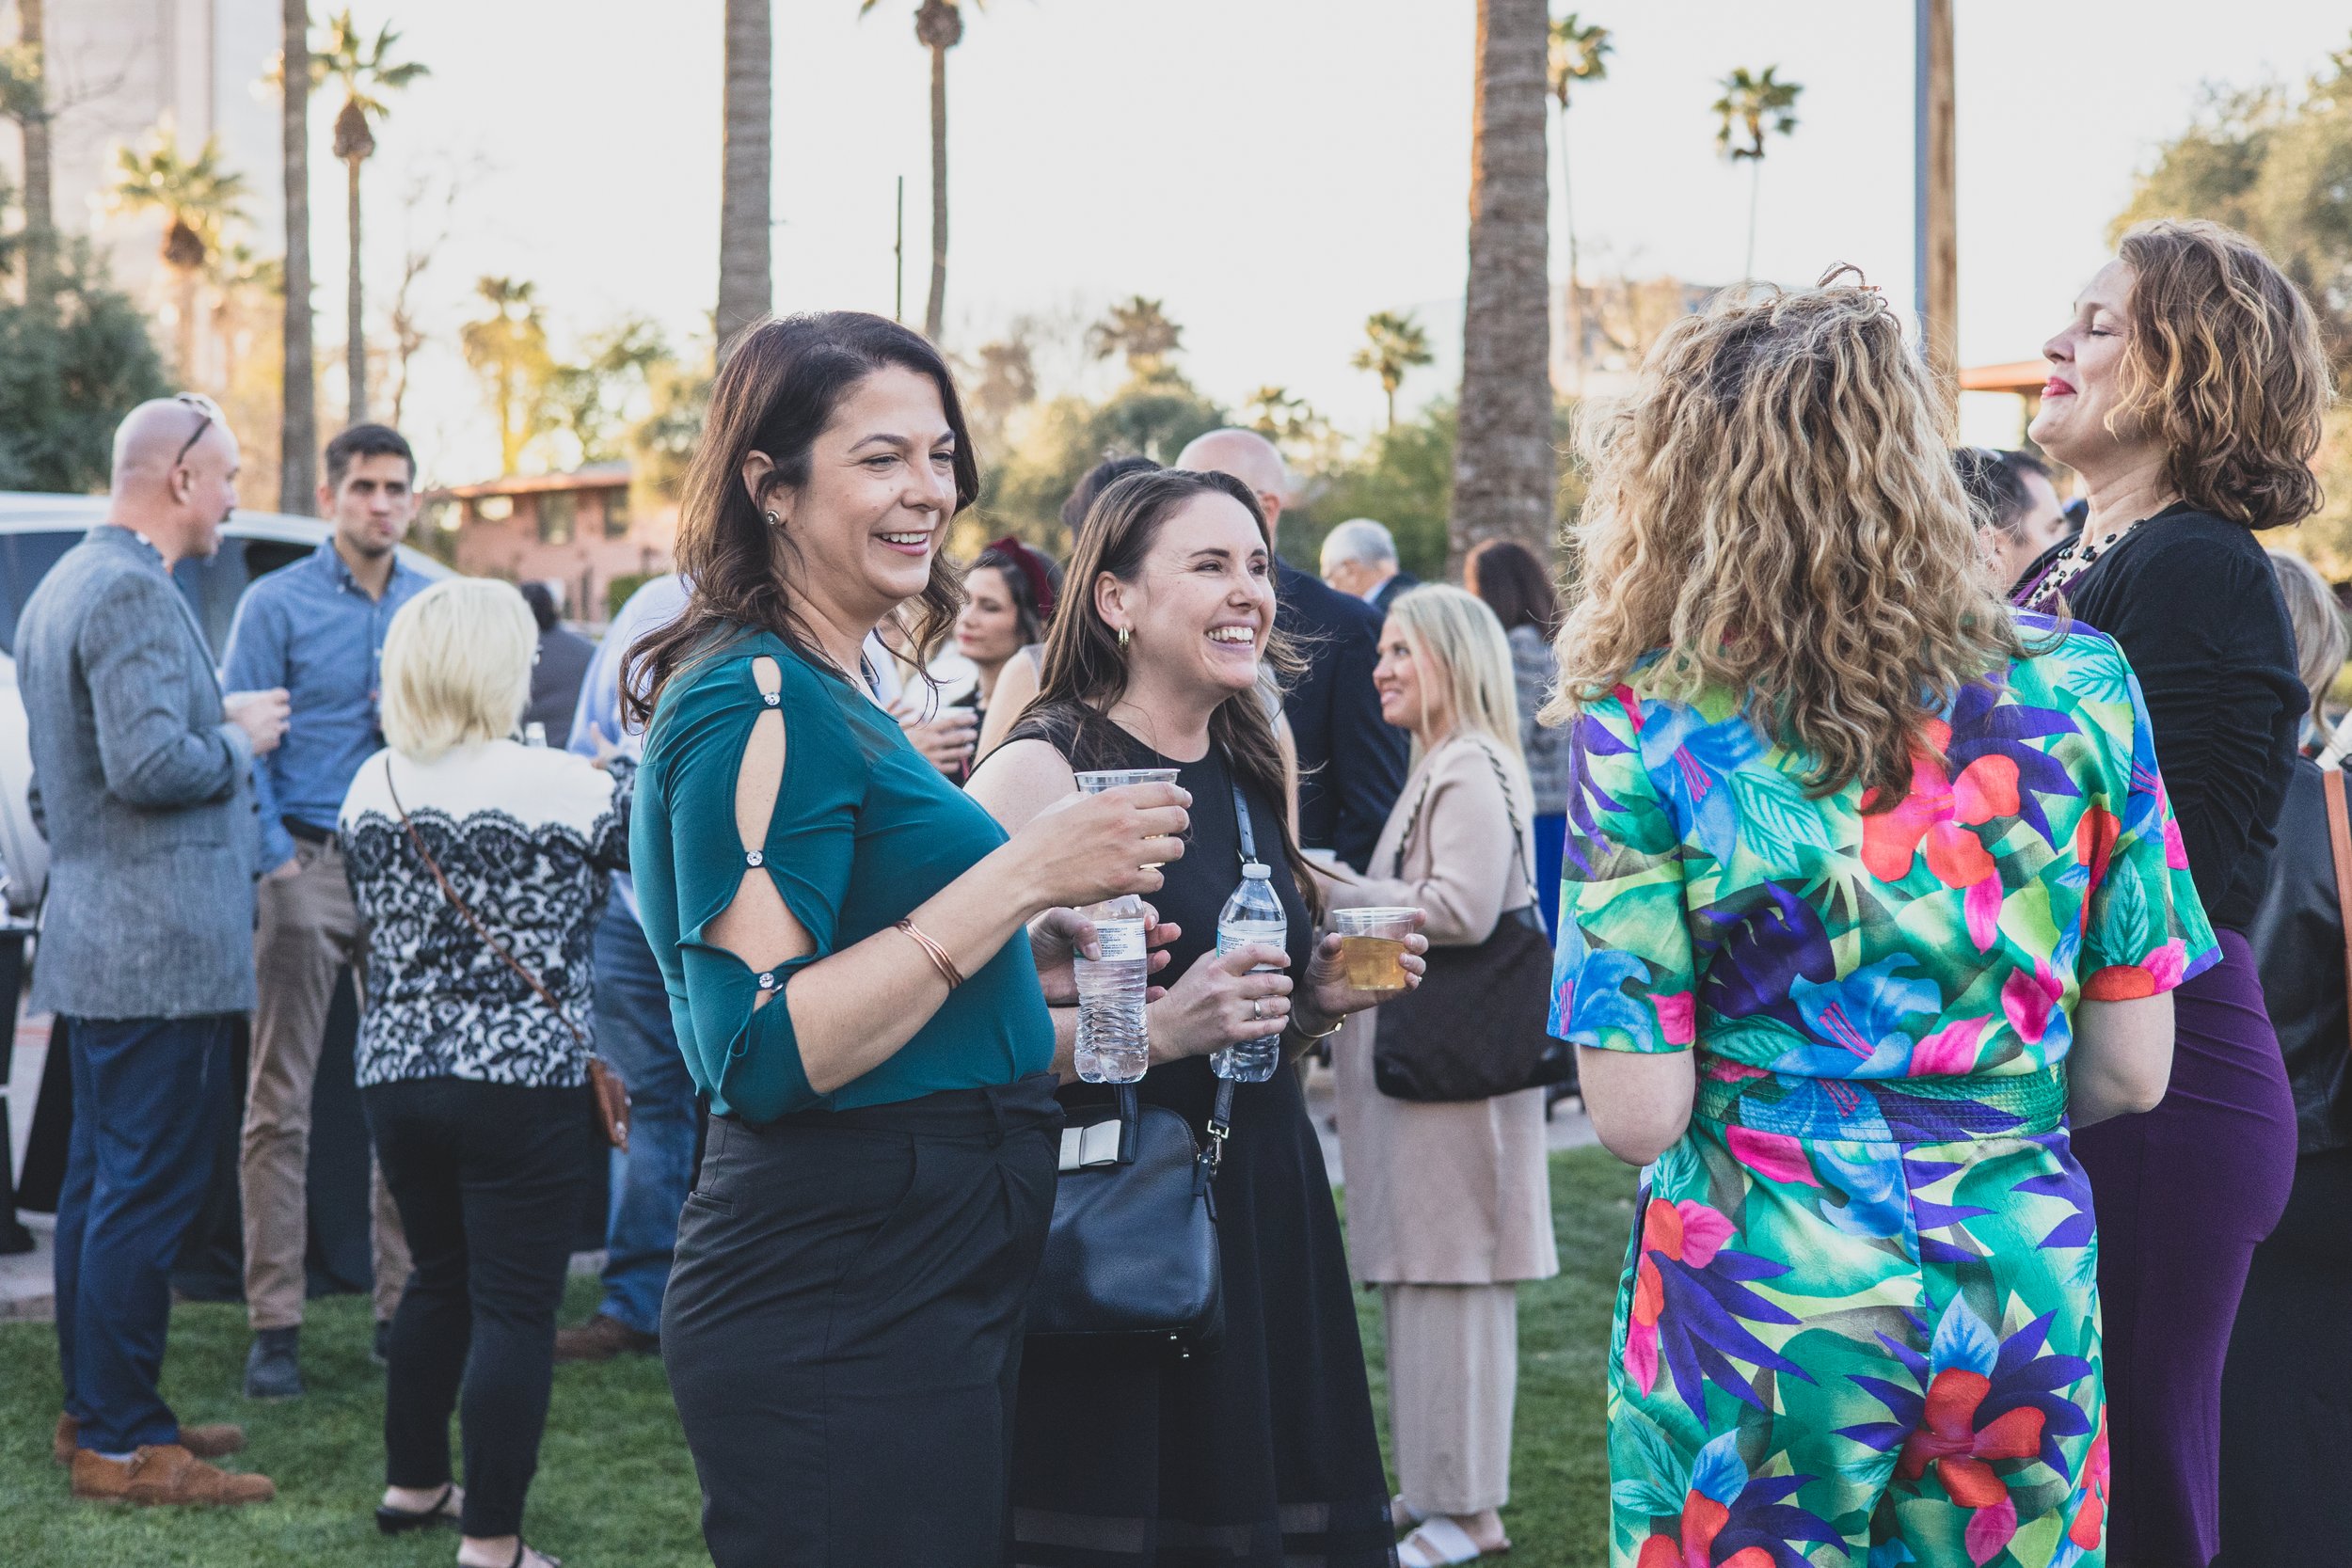 Guests having fun at a Private Corporate at sunset in the Coronado House a Historic Downtown Phoenix's newest venue, by Candid Corporate Event Photographer; Jennifer Lind Schutsky.